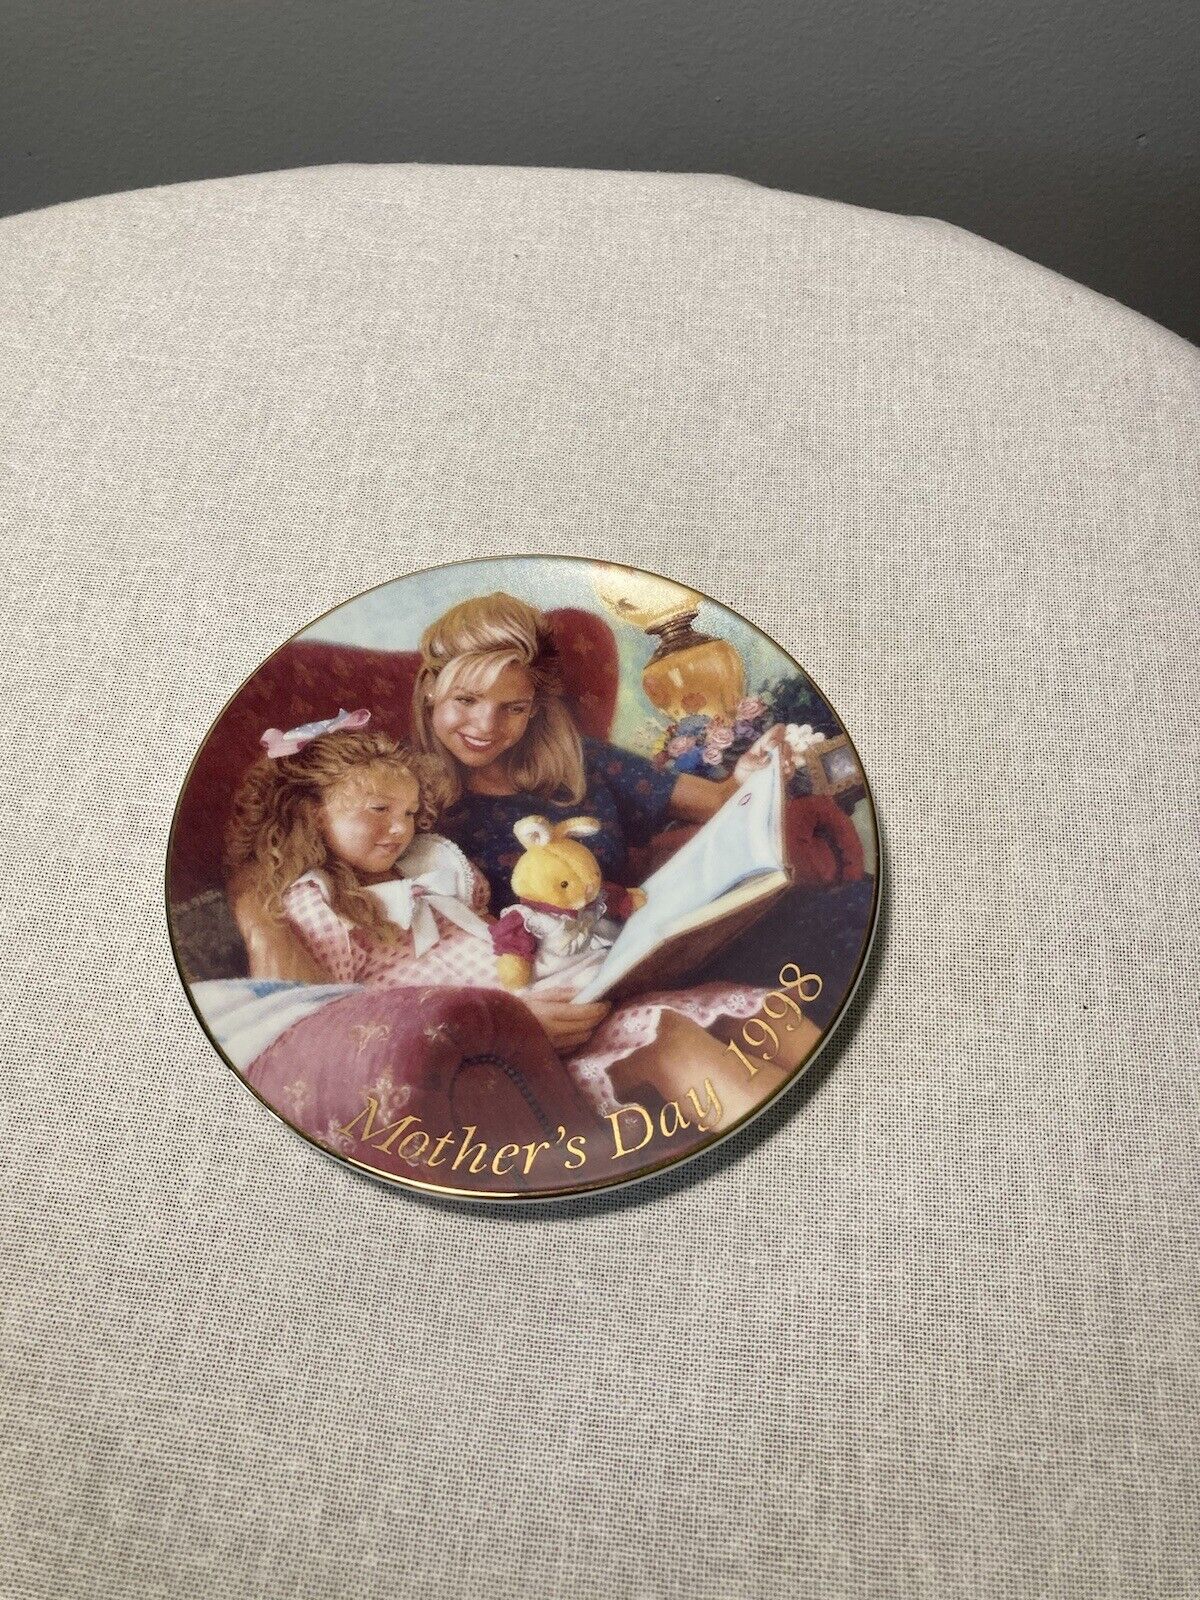 1998 Avon Mother’s Day Plate